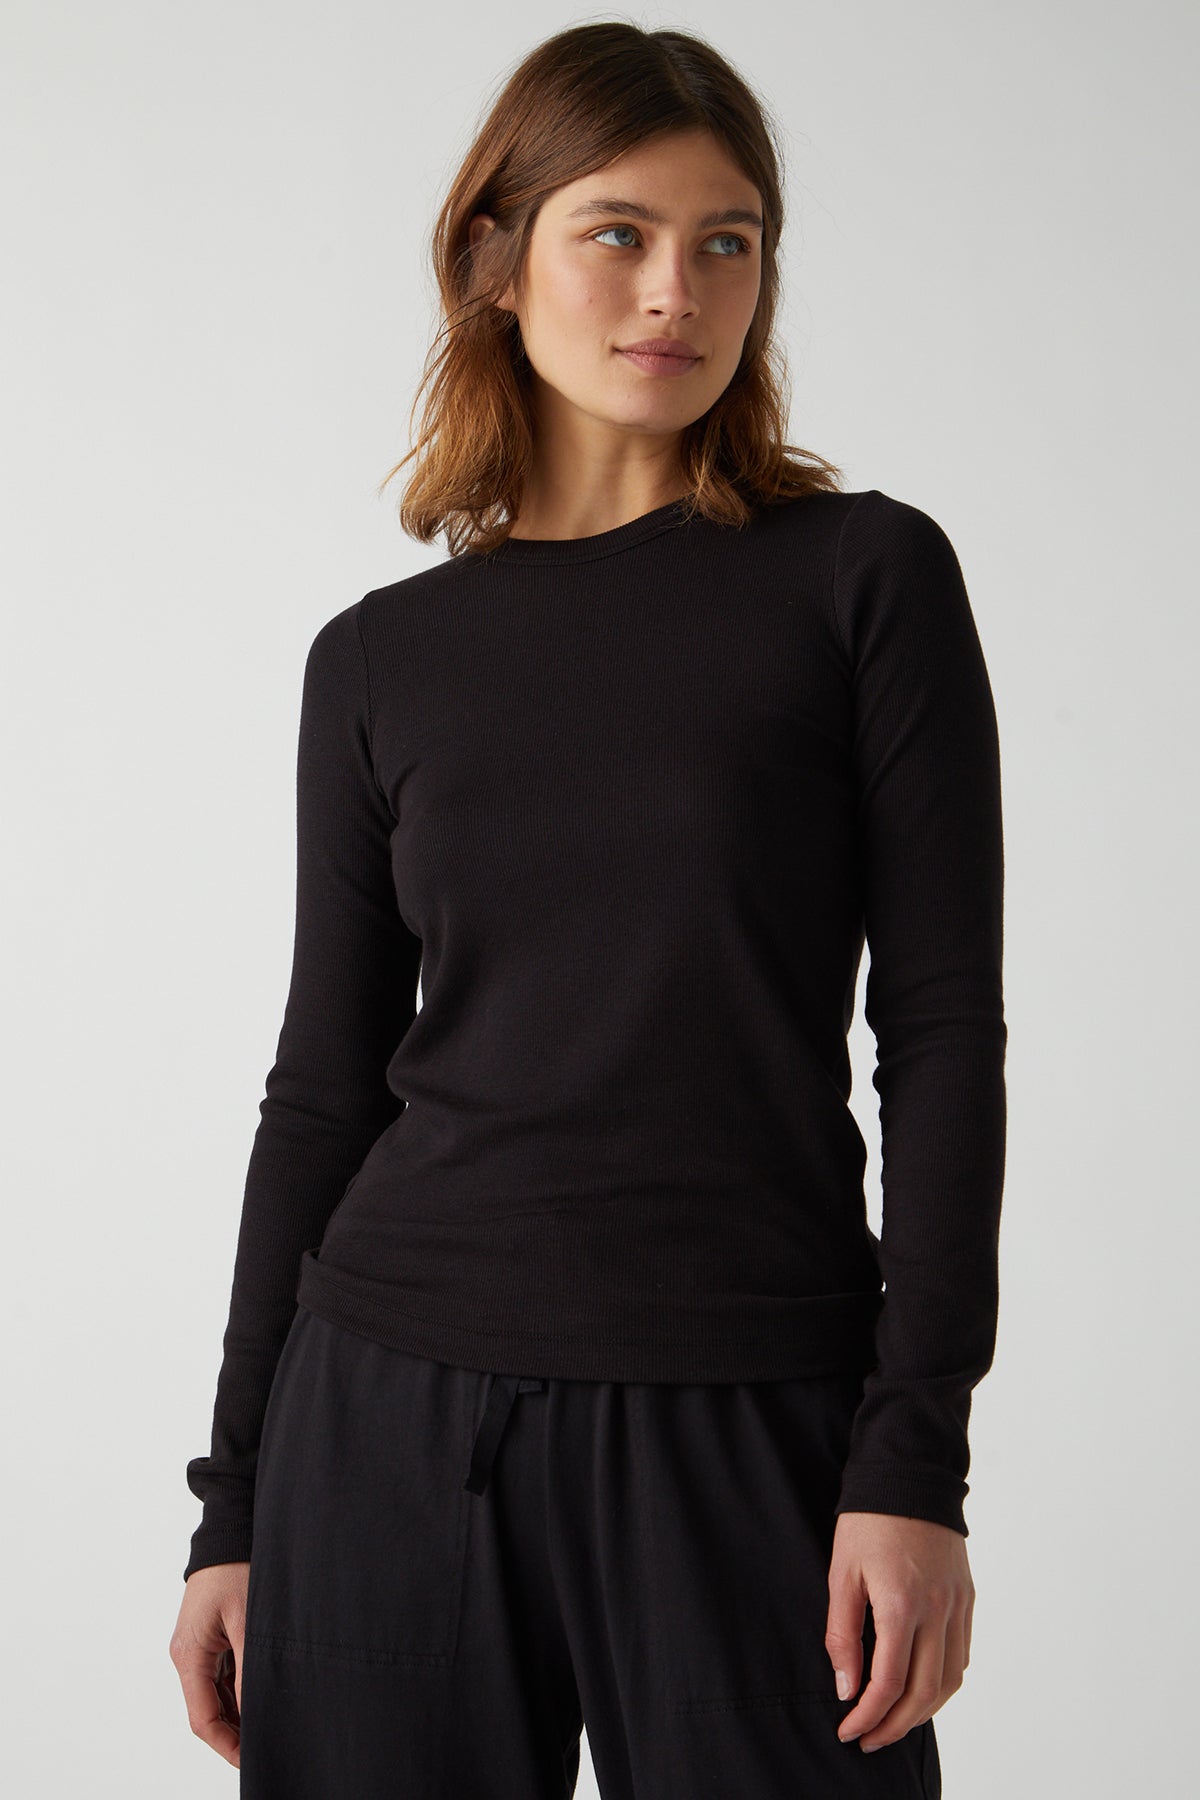 Long Sleeve Camino Tee in black front-26458425229505